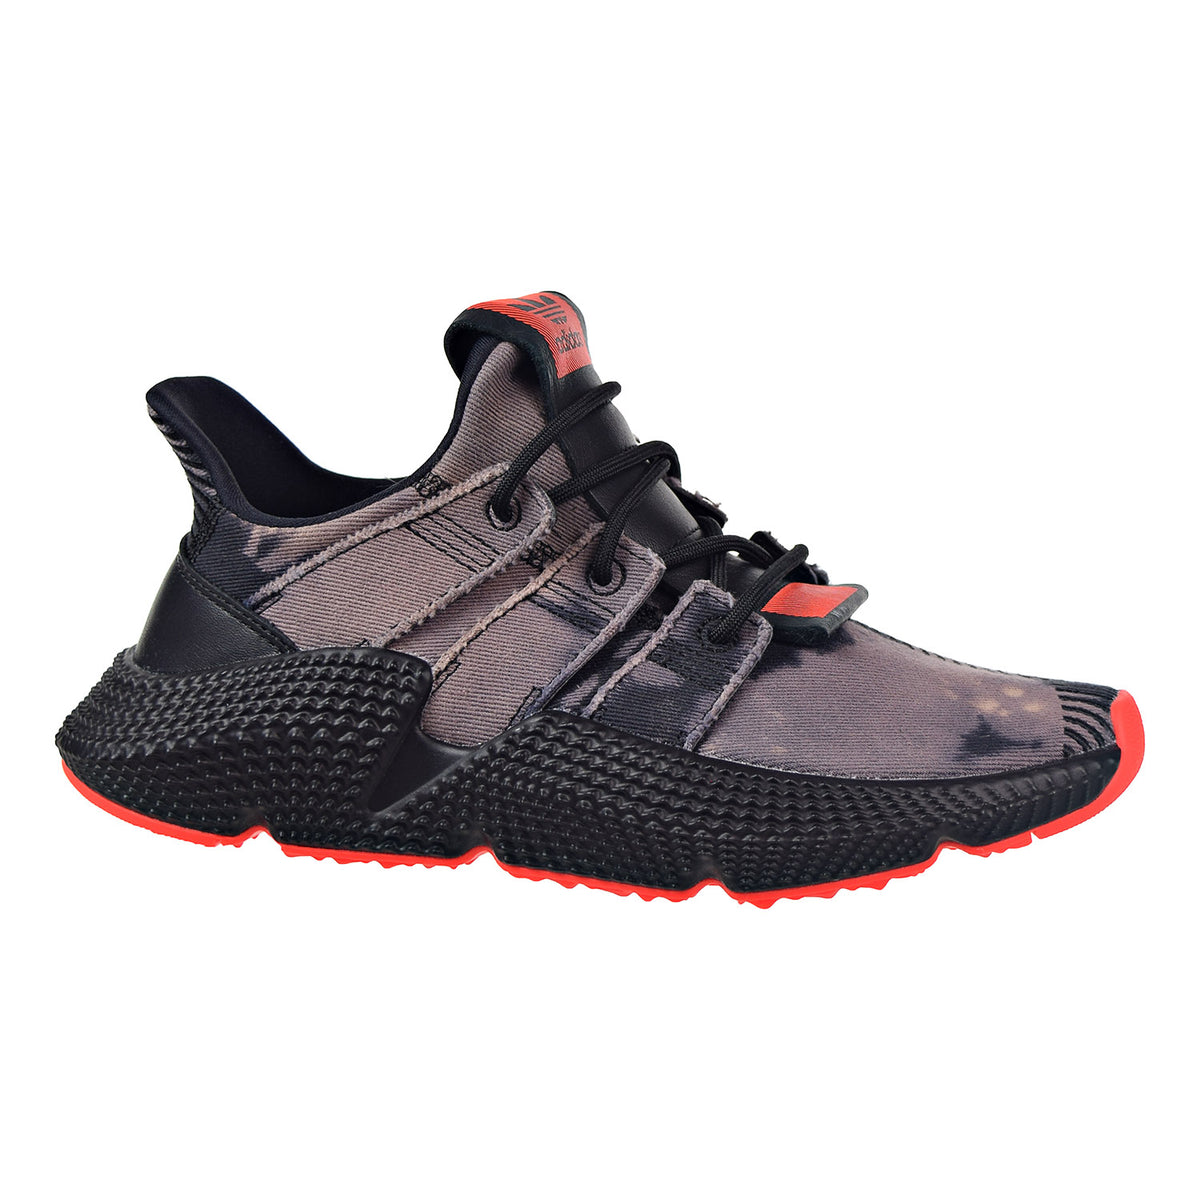 Betsy Trotwood verband Floreren Adidas Prophere Mens Shoes Core Black/Core Black/Solar Red